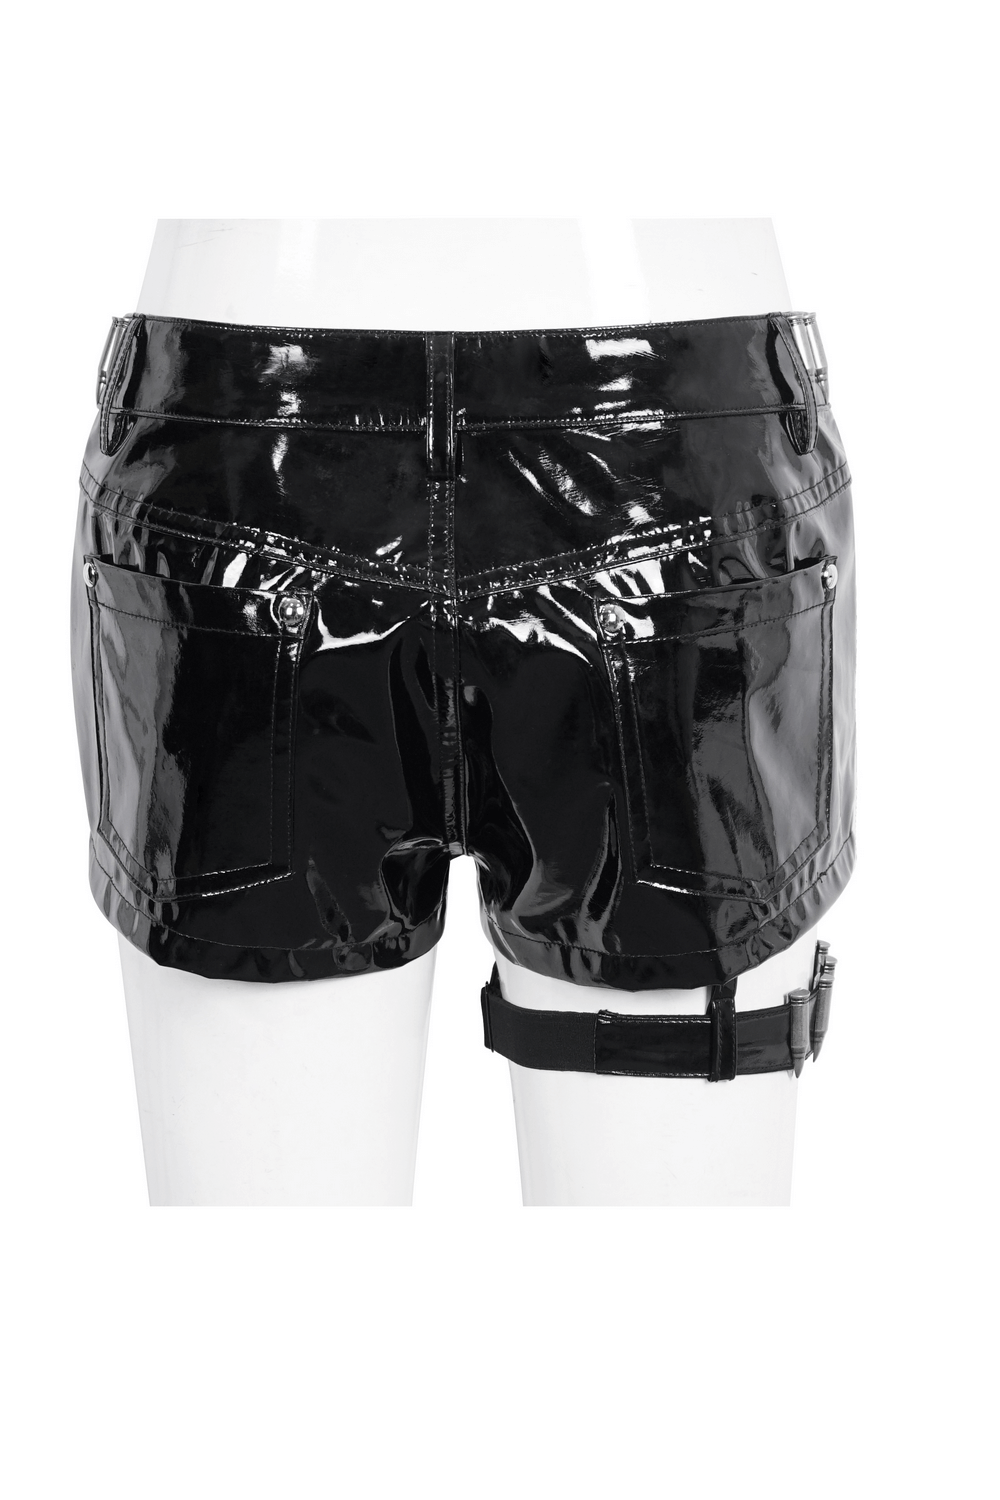 Glossy Black Shorts with Chain Details - Edgy Style